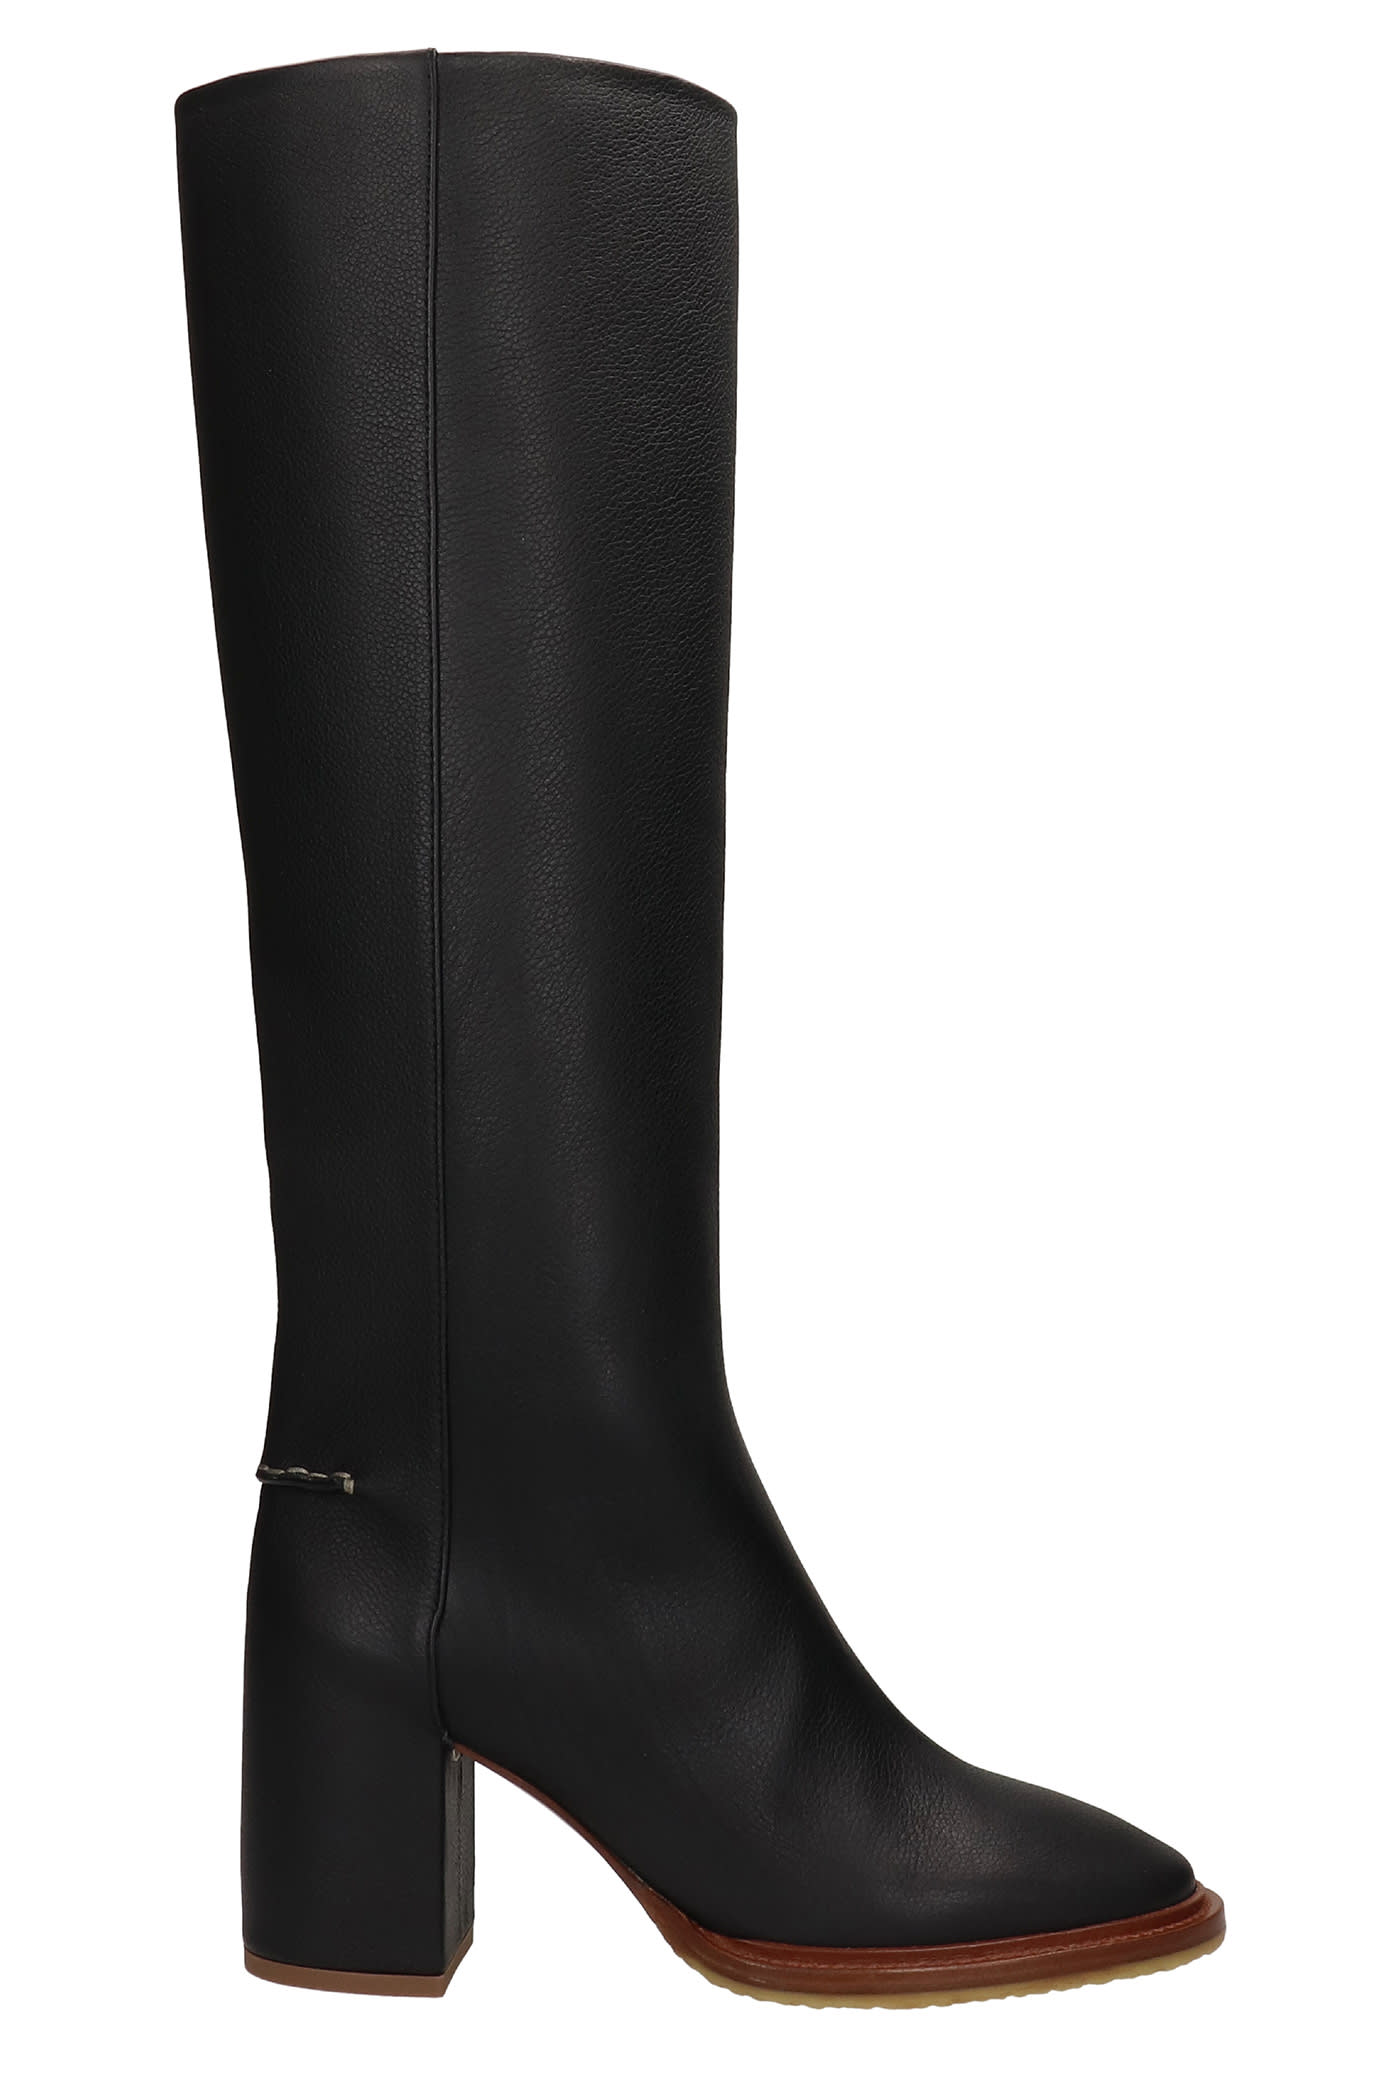 Chloé Edith Low Heels Boots In Black Leather